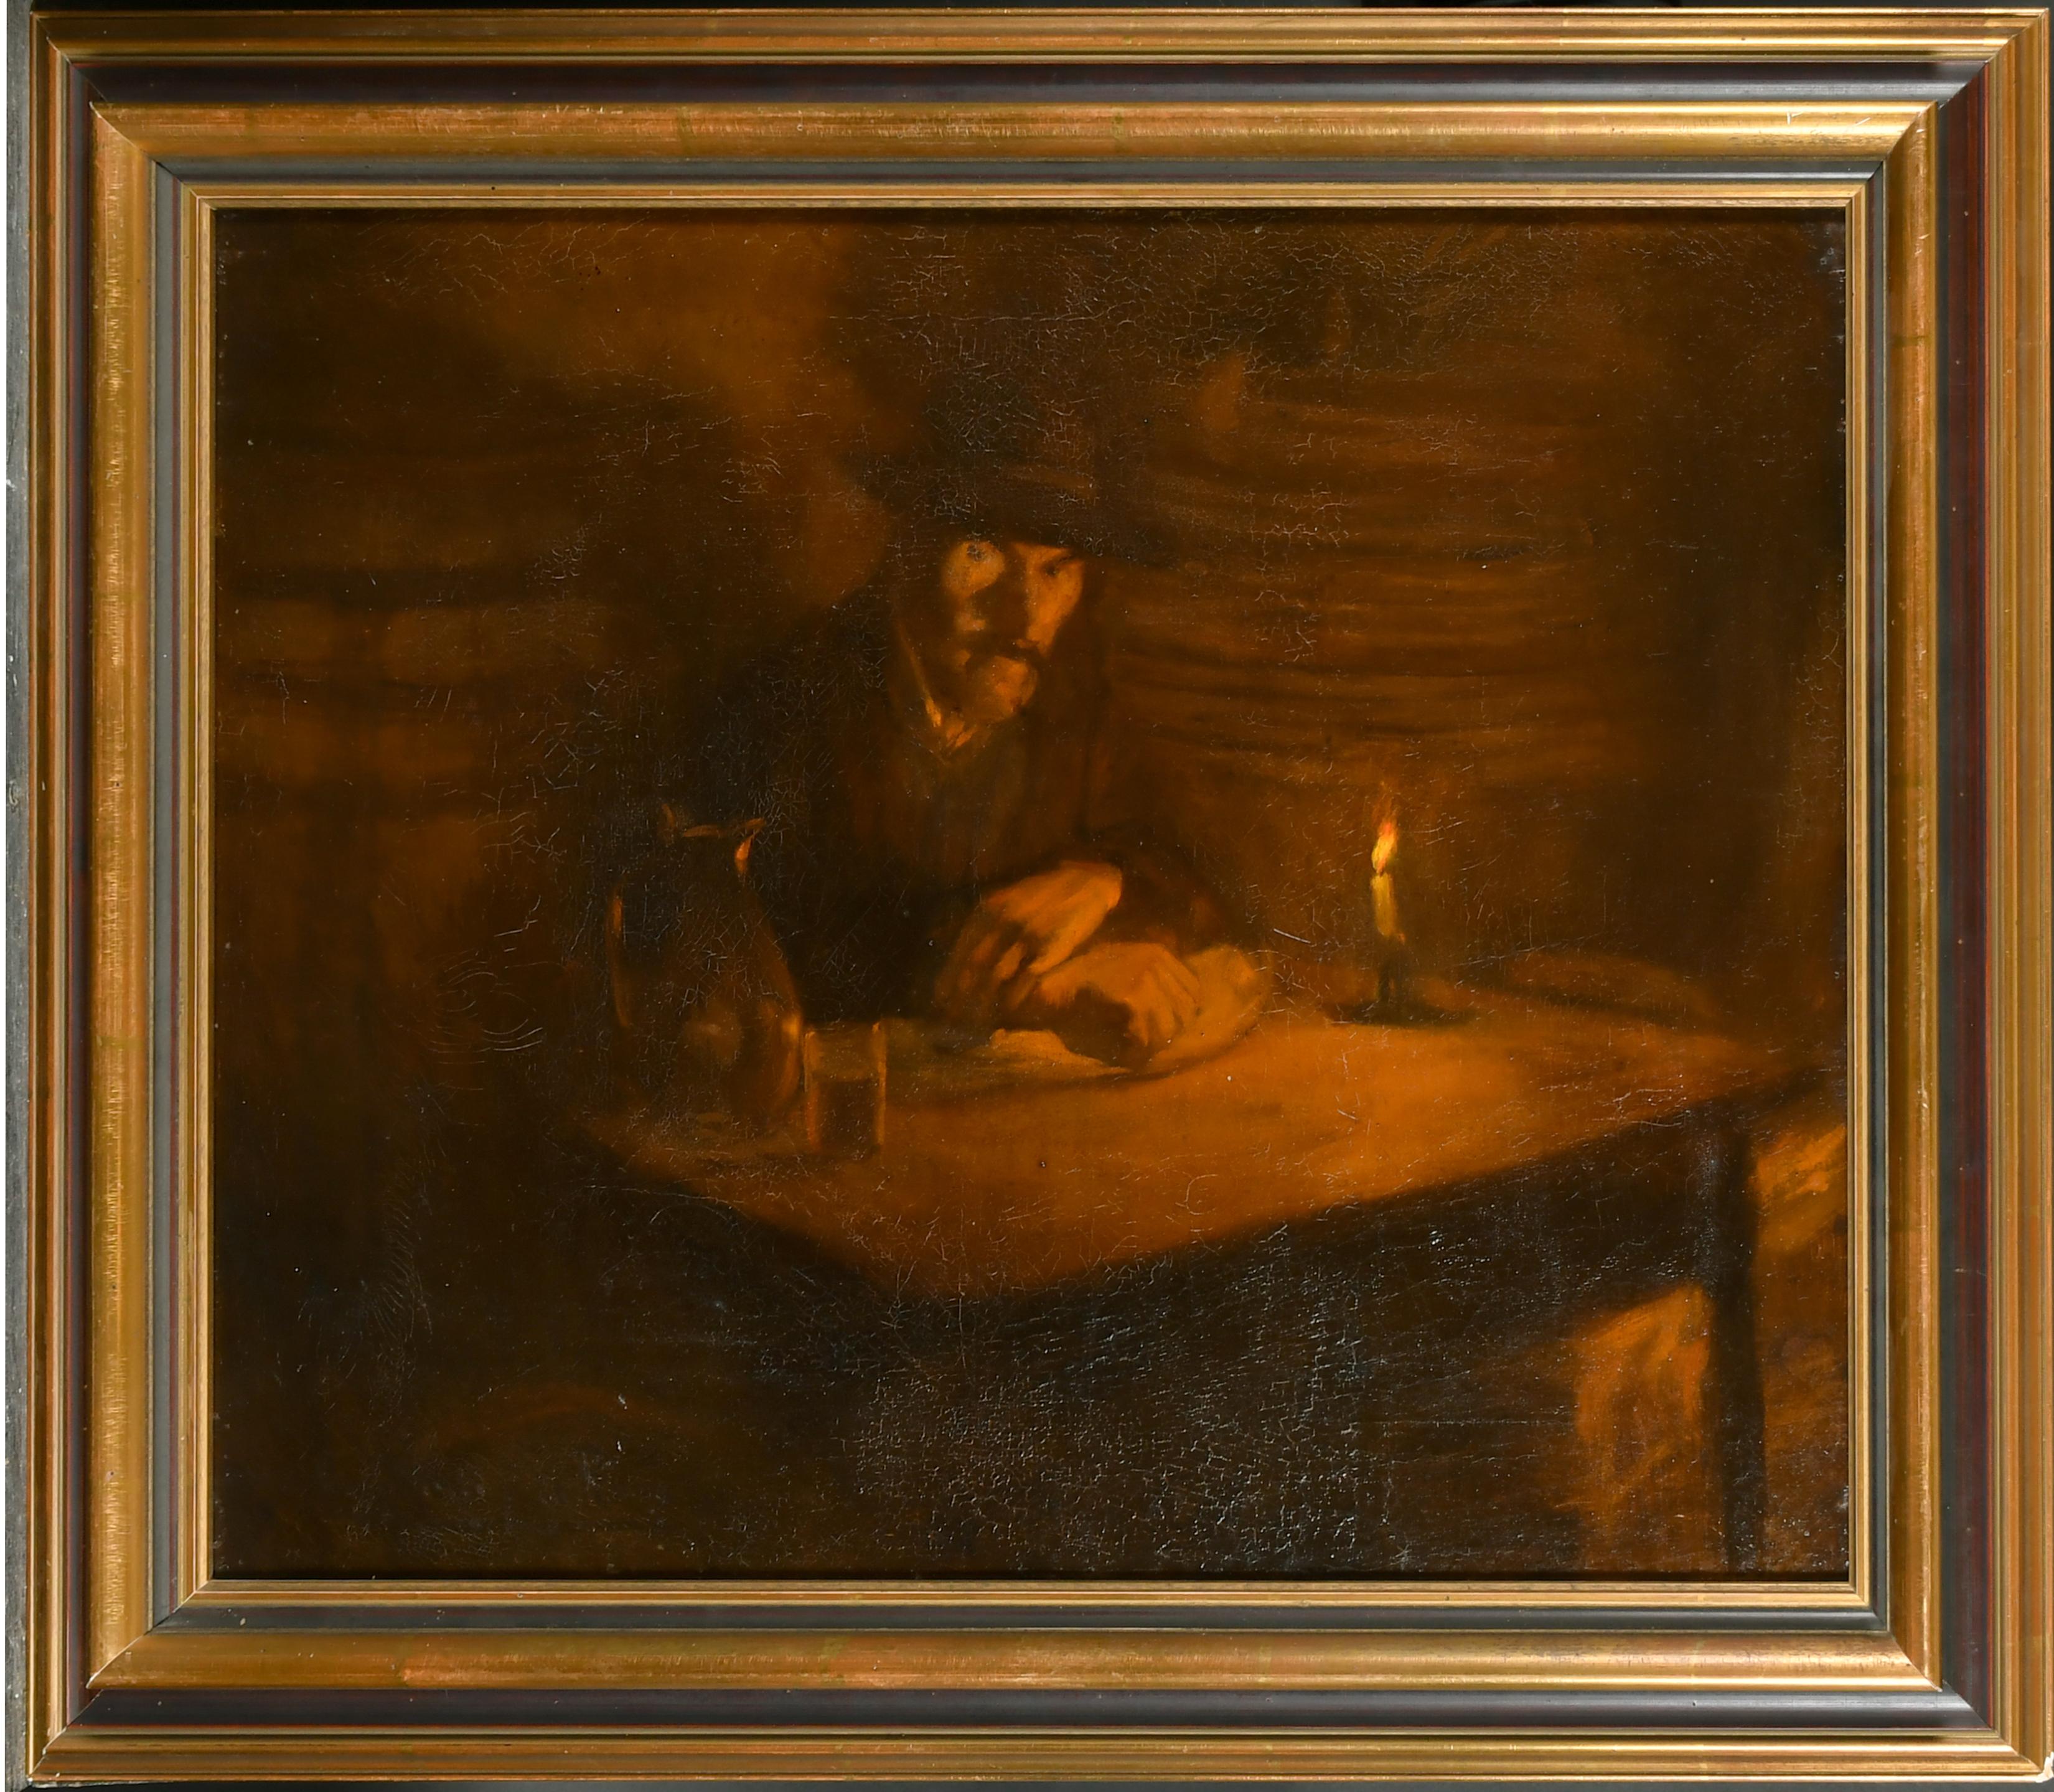 A Figure by Candlelight
19th-20th Century European School (most likely French)
signed indistinctly, oil painting on canvas, framed
framed: 25 x 29 inches
canvas: 20 x 24 inches
provenance: private collection, England
condition: very good and sound